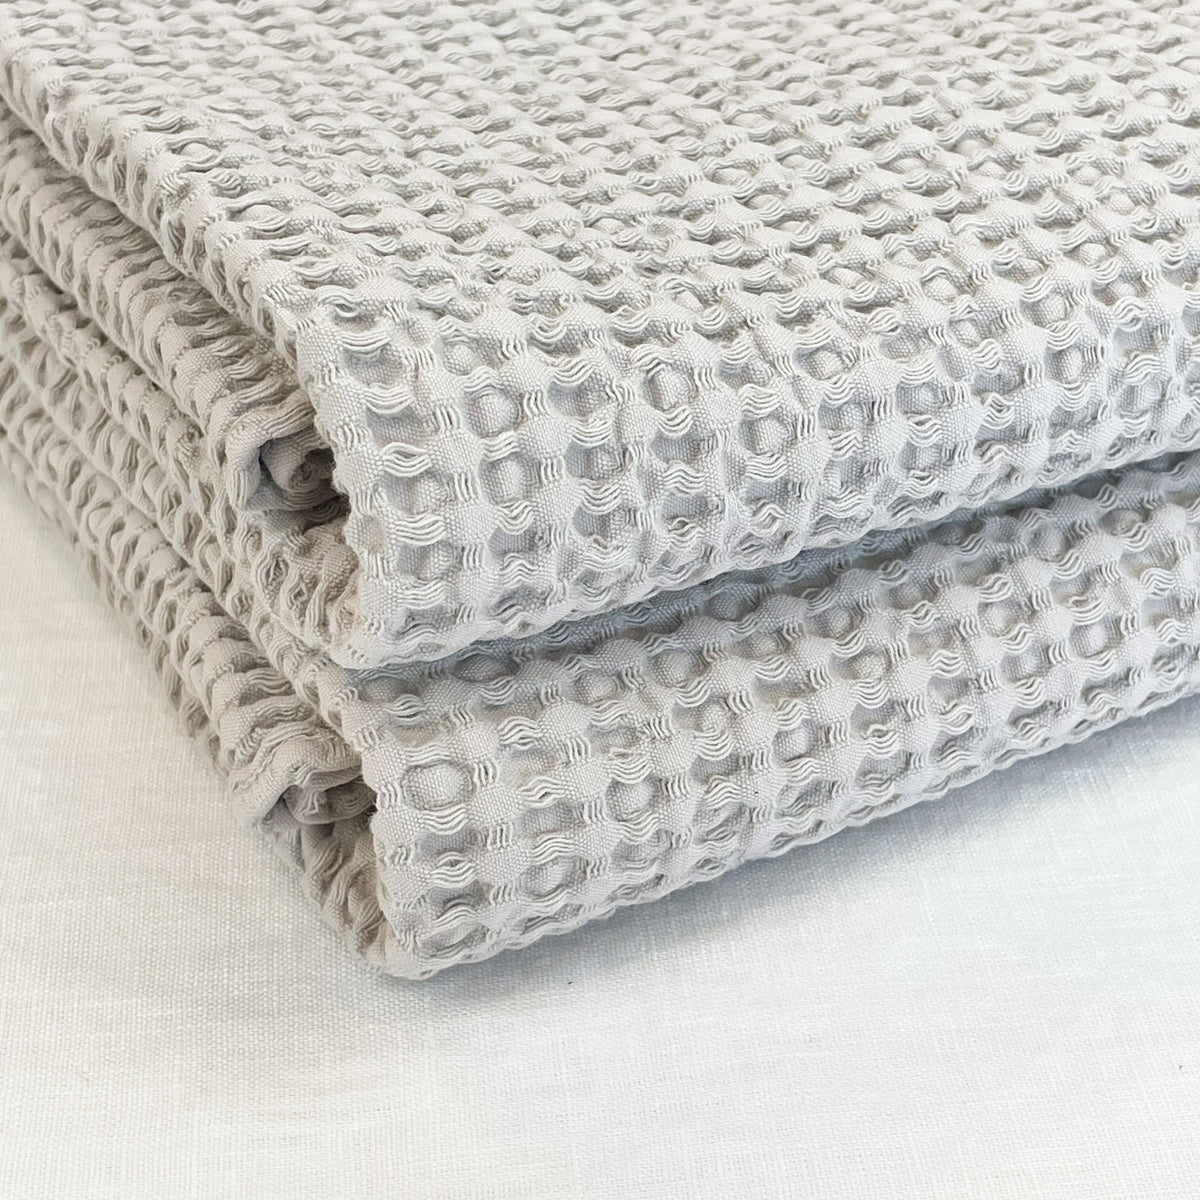 QUILTINA Cotton Waffle Weave Dish Towels Set, 17 x 25 Inches, 6 Pack,  Beige, Brown, Dark Grey